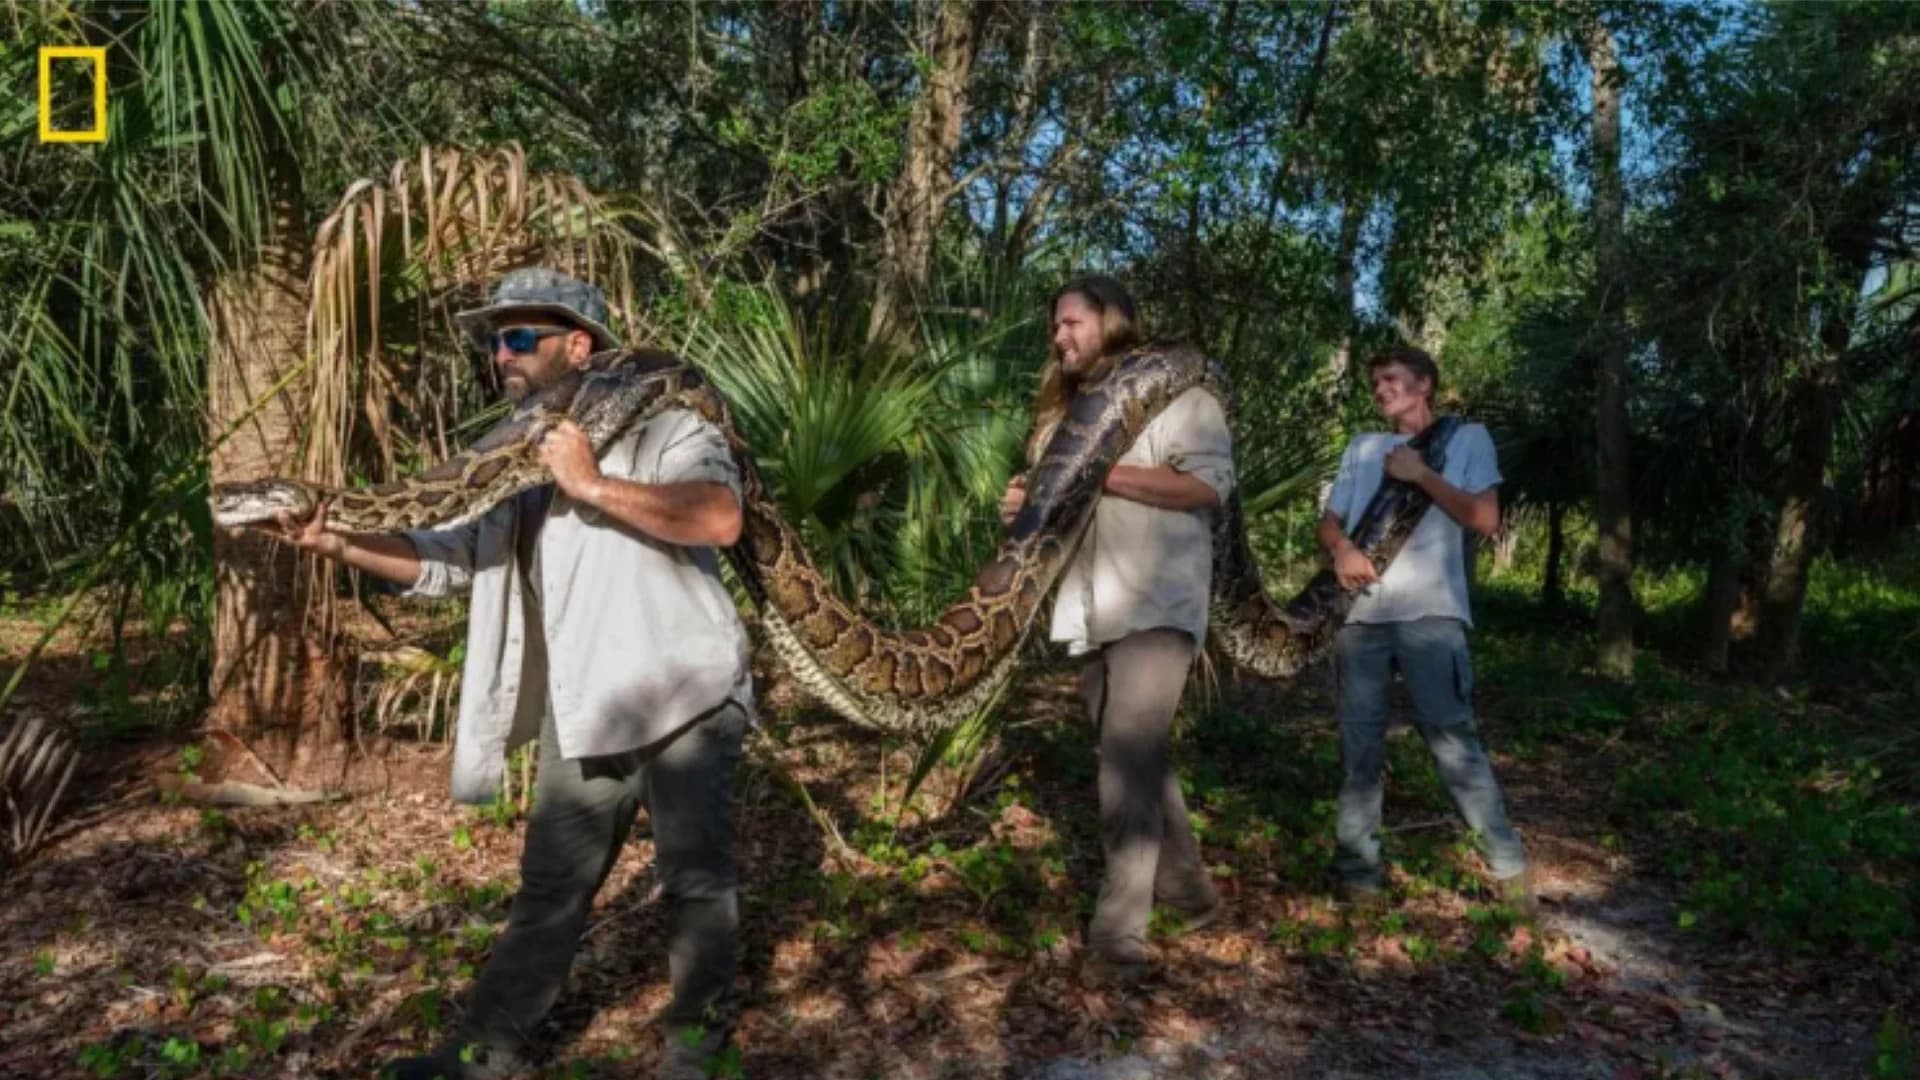 What's Hot: Largest python ever found in Florida is 18 feet long and weighs over 200 pounds